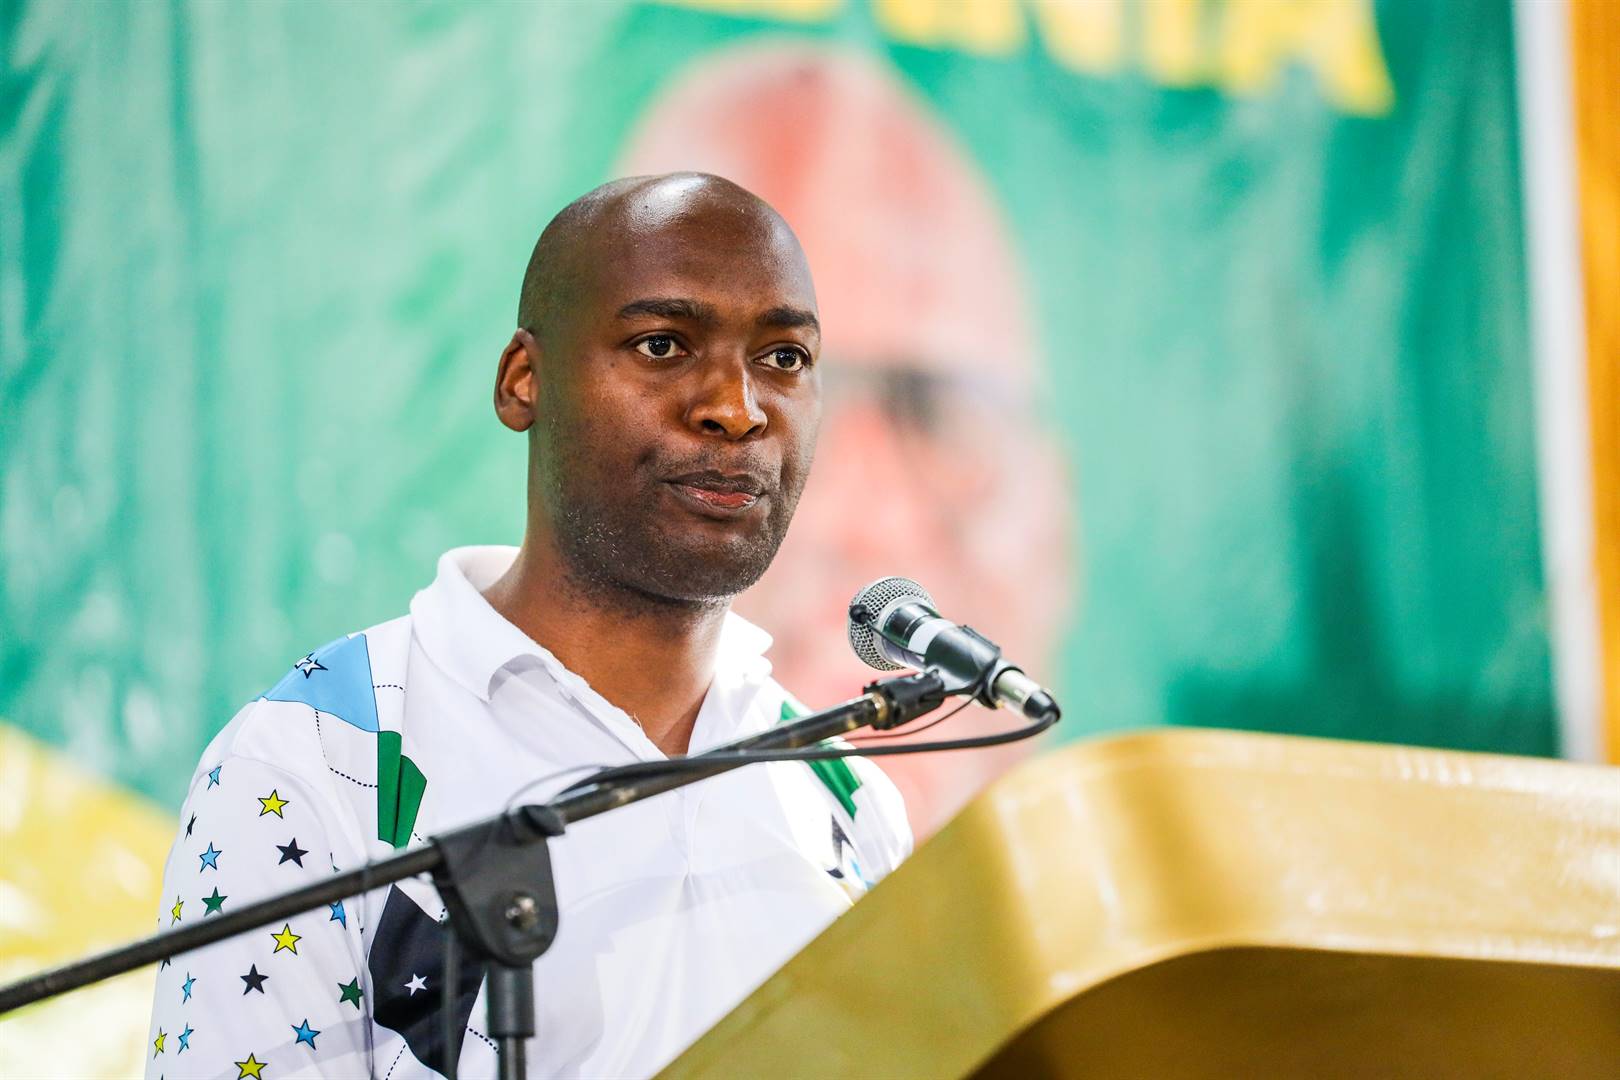 Vuyo Zungula says allowing Zanu-PF to observe South Africa’s elections risks tarnishing the legitimacy and credibility of the country’s electoral processes